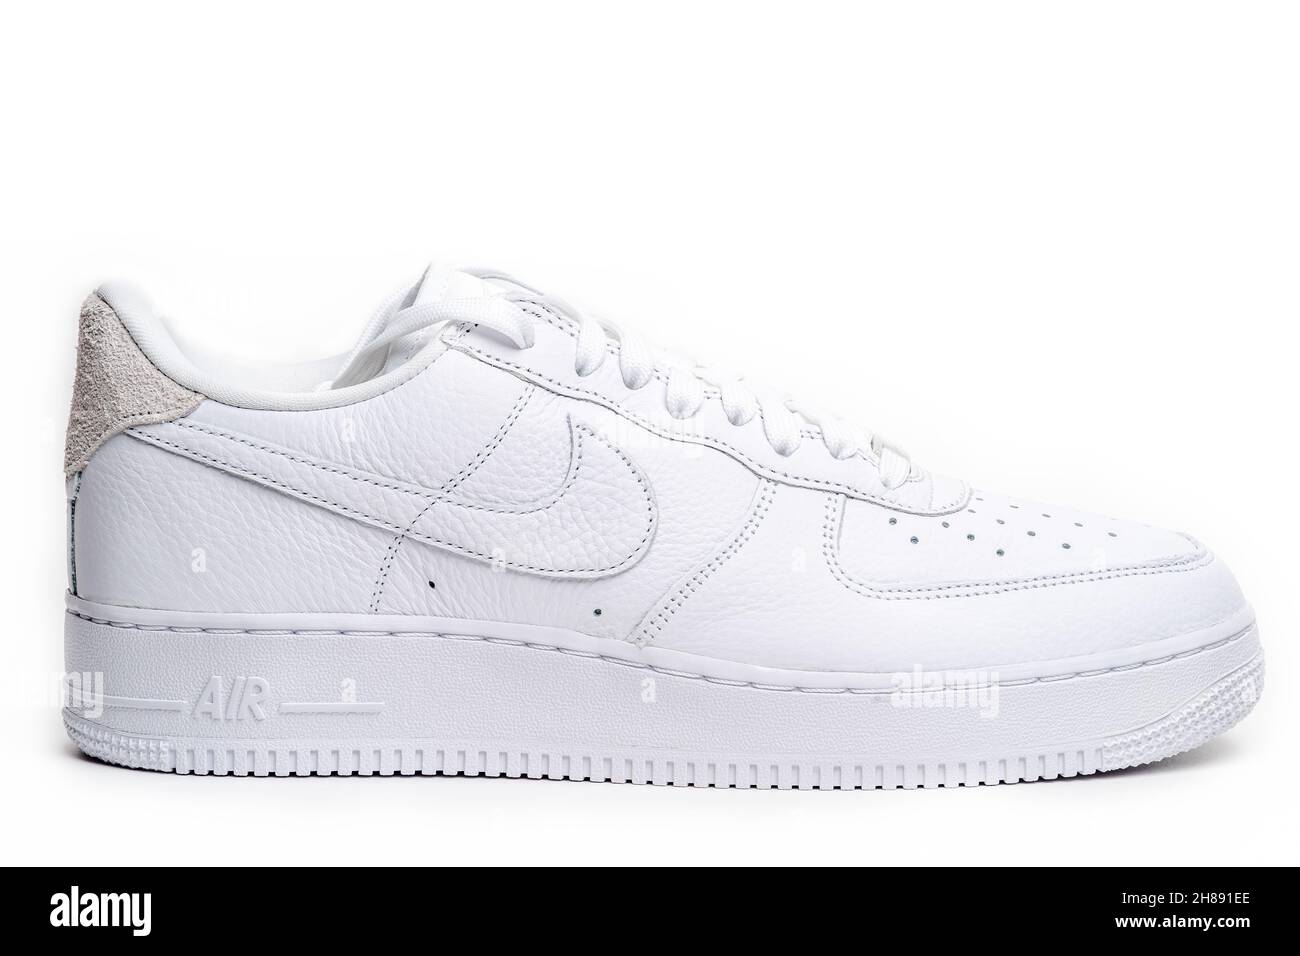 Air Force 1 Sneaker High Resolution Stock Photography and Images - Alamy